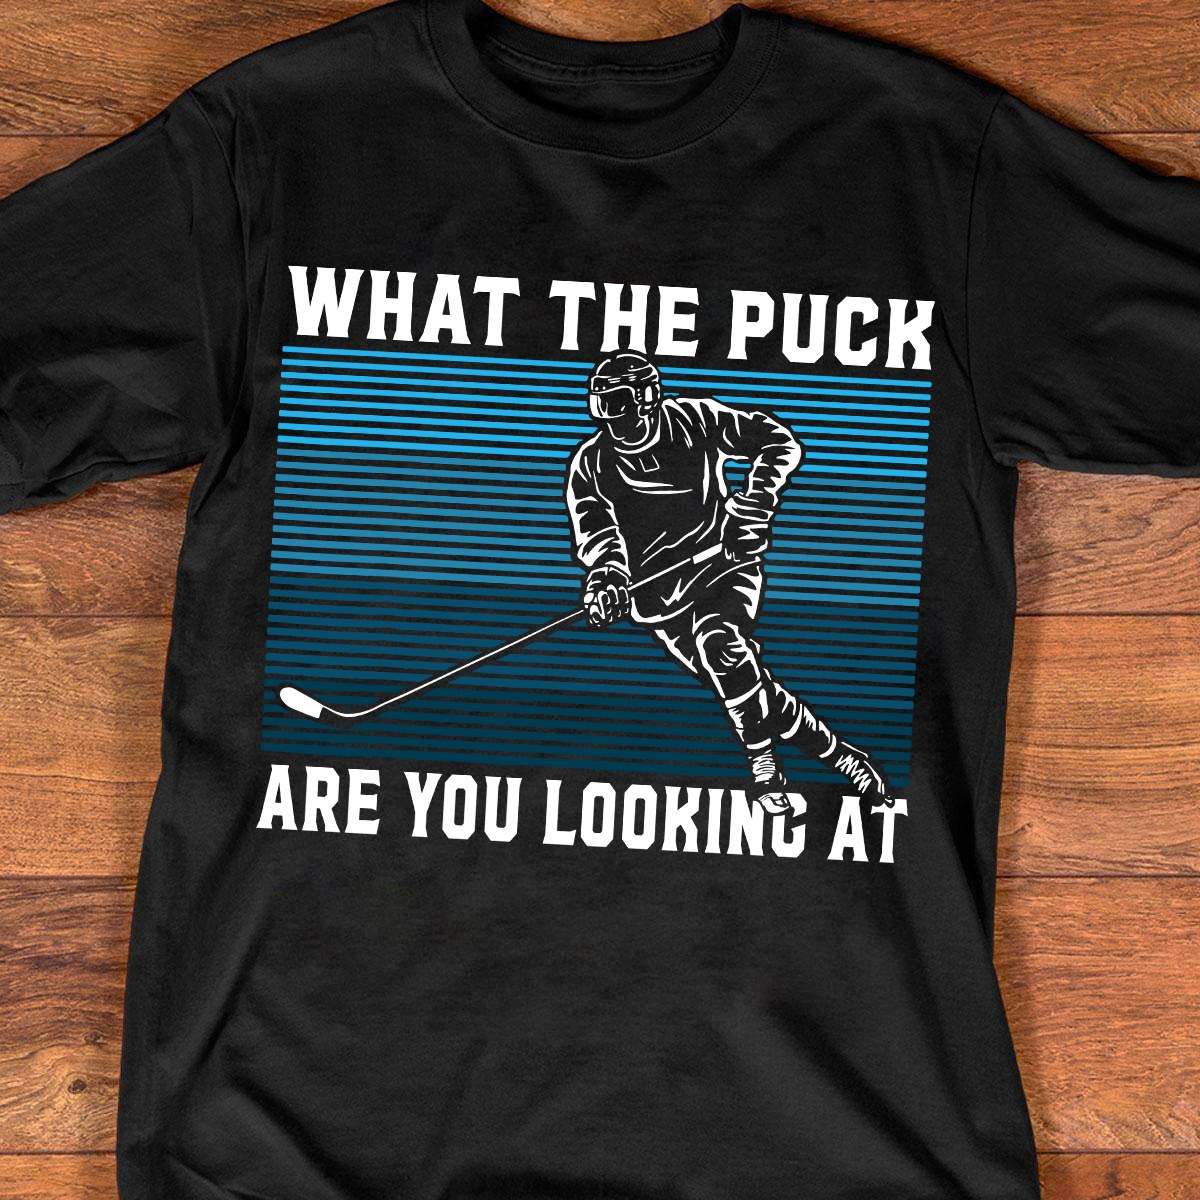 Ice Hockey Man - What the puck are you looking at